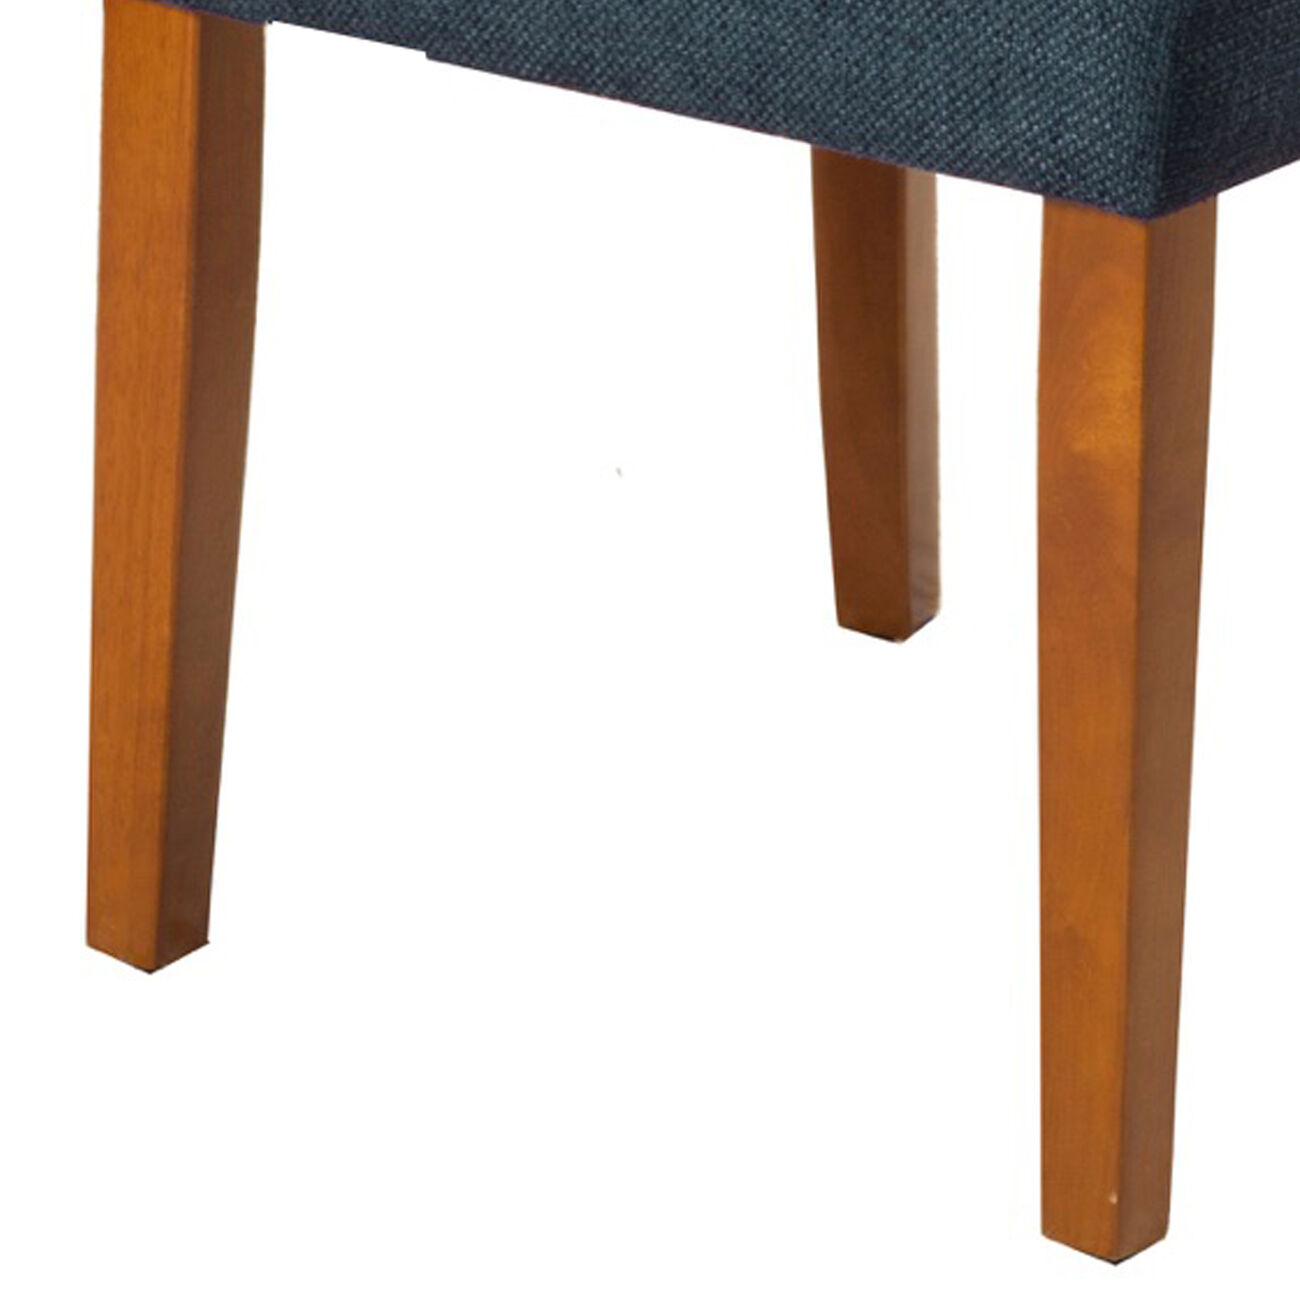 Fabric Upholstered Parson Dining Chair with Wooden Legs, Navy Blue and Brown, Set of Two